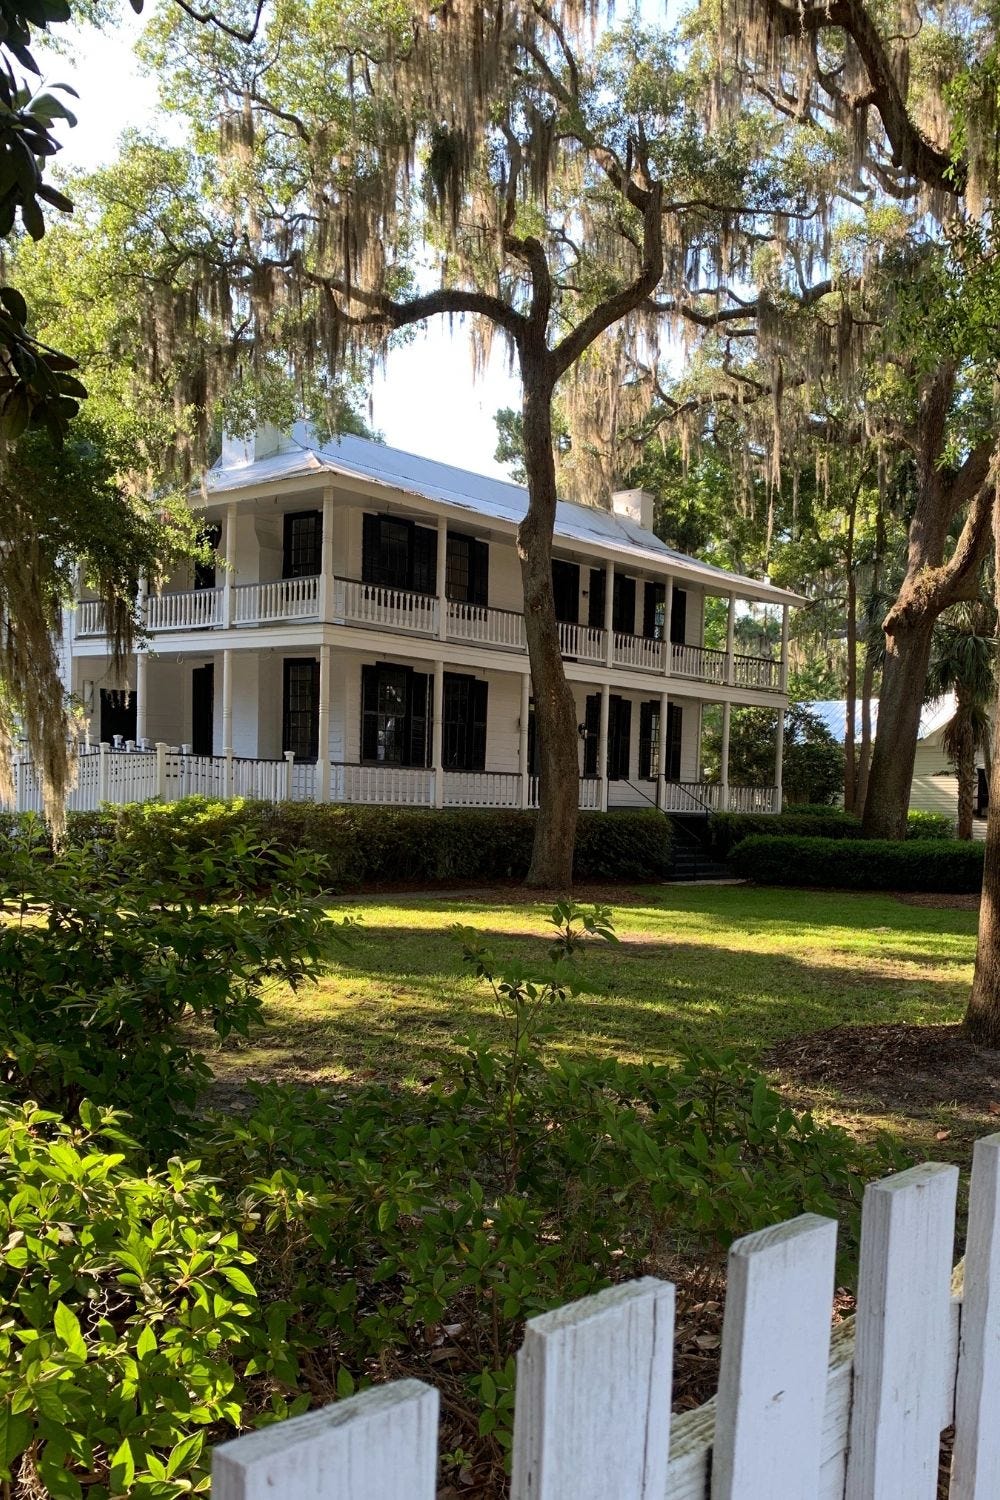 A historical home on Calhoun Street in Old Town Bluffton is one of my favorite sights.